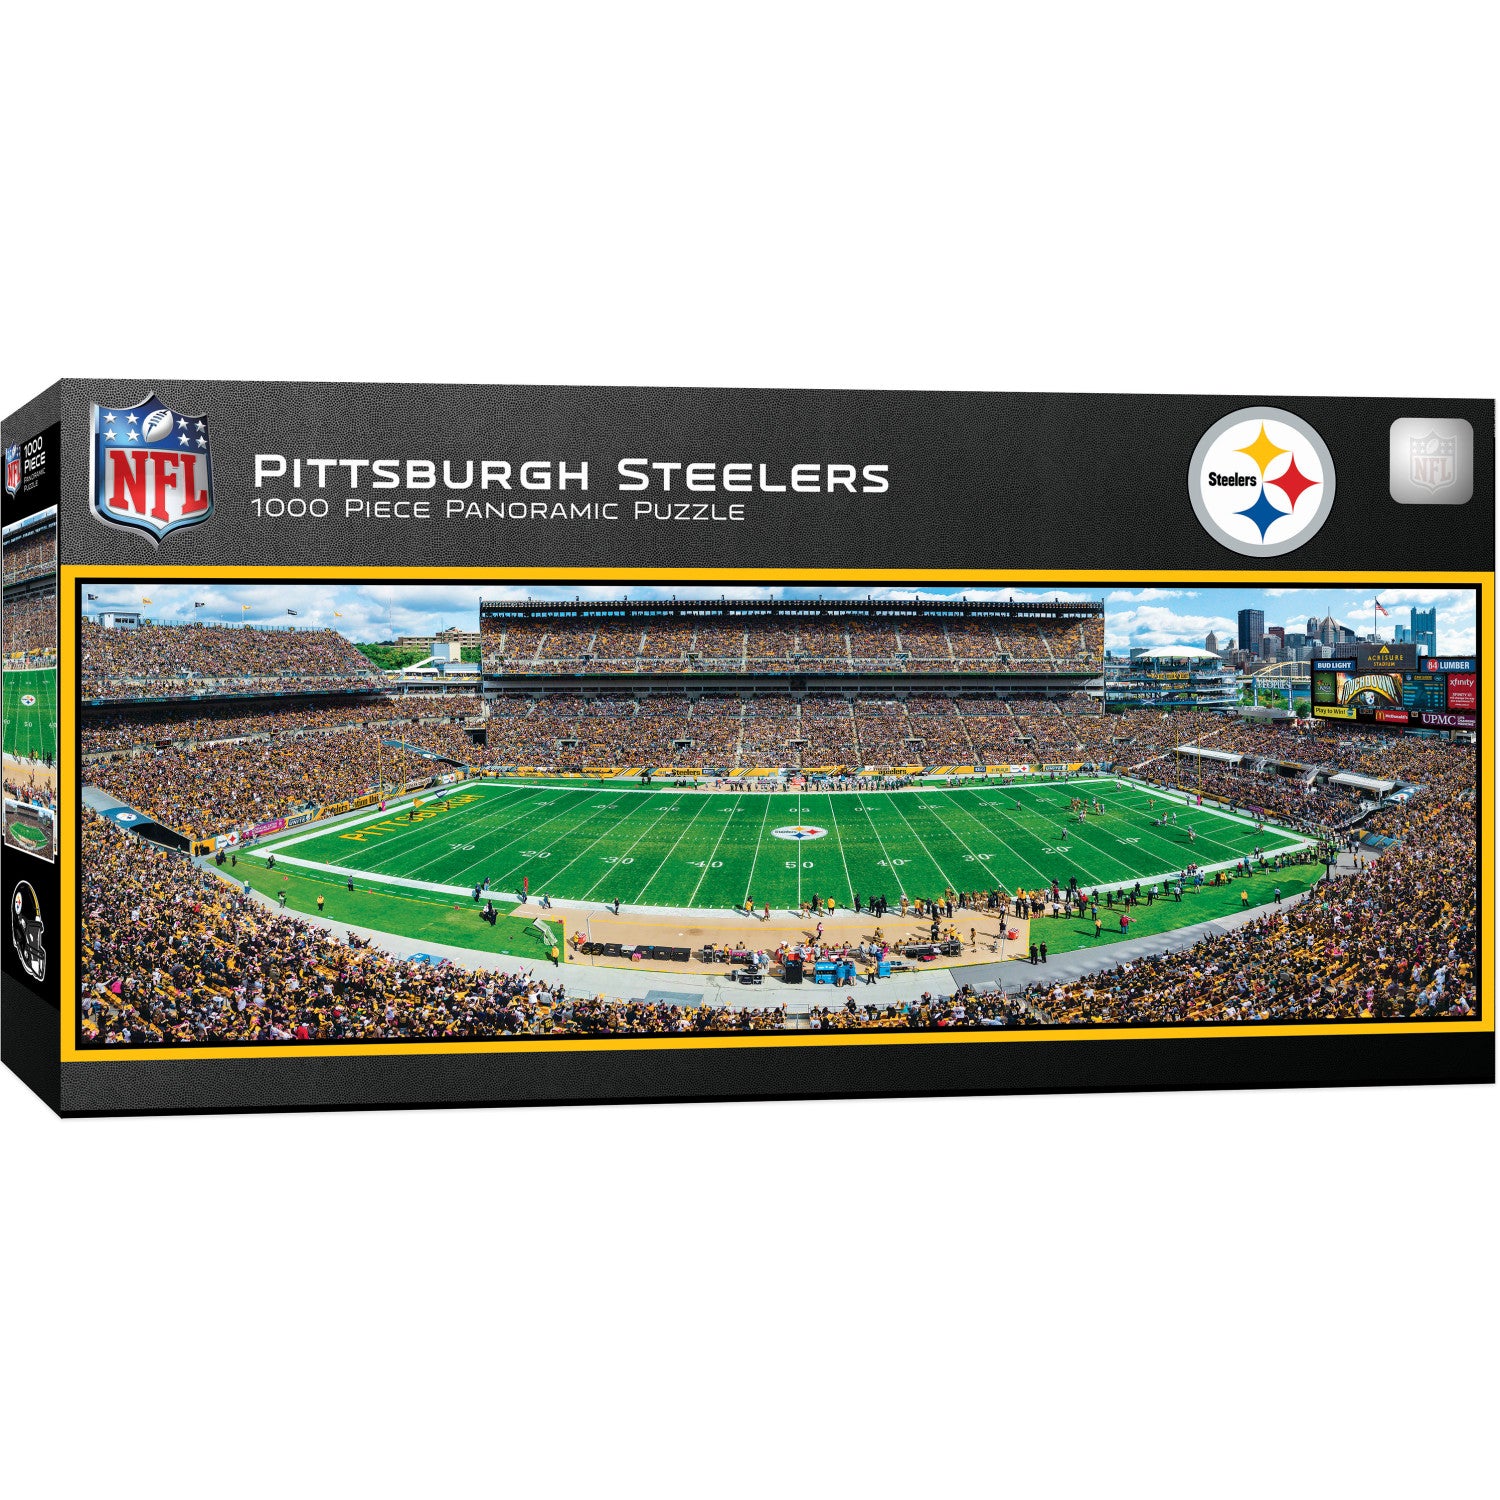 Pittsburgh Steelers - 1000 Piece Panoramic Puzzle - Center View